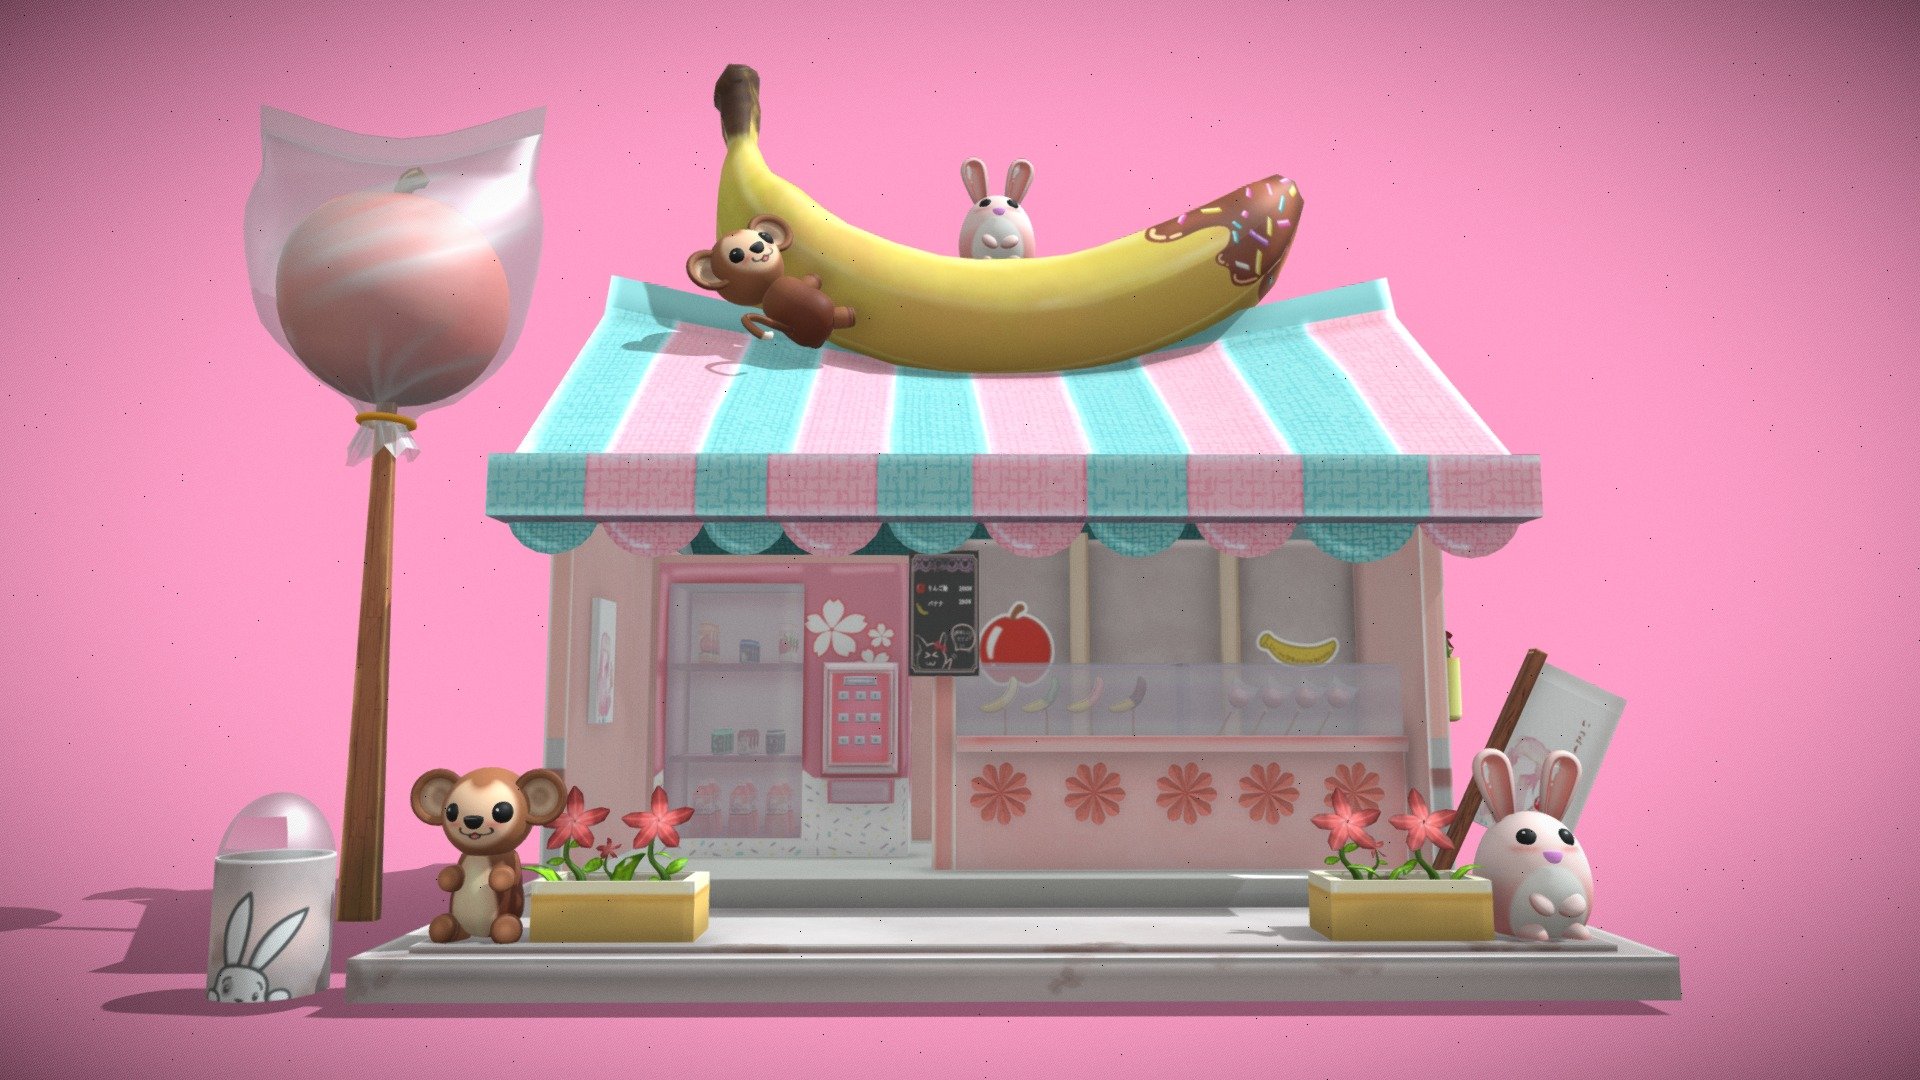 Eyyyy! First model created for university project     (≧◡≦) Not exatcly the most complex model but its one of my memorable model! A lot happened in the process of getting this done but regardless, I'm happy with its outcome ( ´ ∀ `)ノ～ ♡ - Ringo and Choco Banana shop (ﾉ◕ヮ◕)ﾉ*:･ﾟ✧ - 3D model by Ash (@Jasmine.Ashley) 3d model